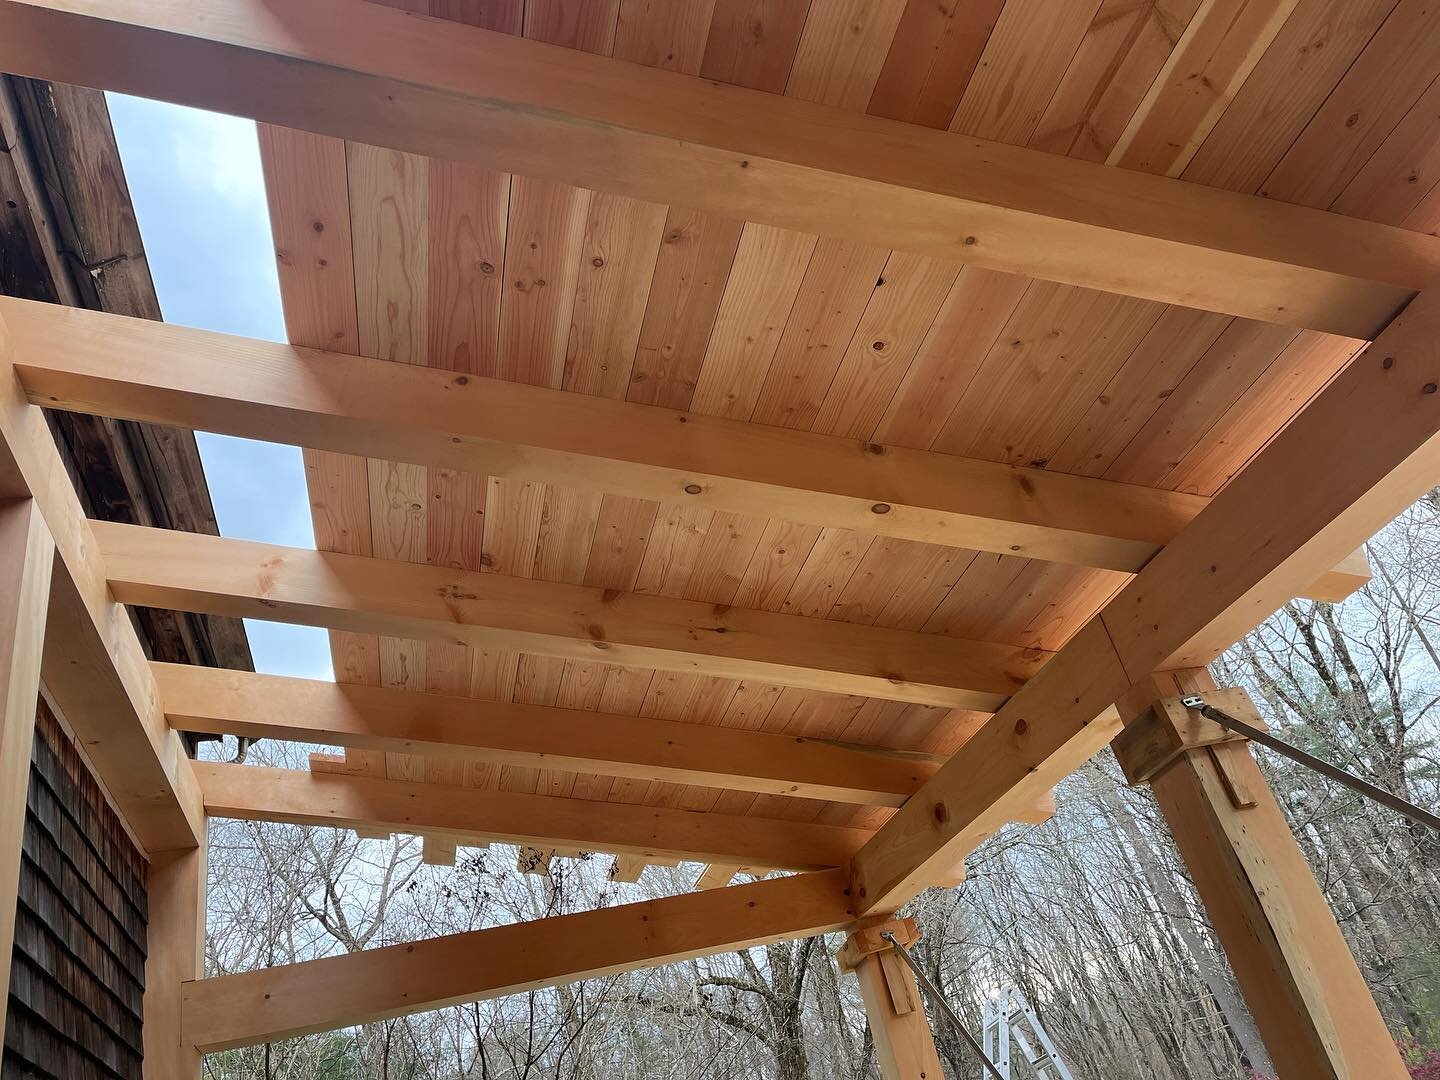 In many ways, this project is a lot like the post and beam home we framed last year, and so we&rsquo;ve had the chance here, with this addition, to apply what we learned. Today, we were able to install more 2X8 tongue and groove roof sheathing with a